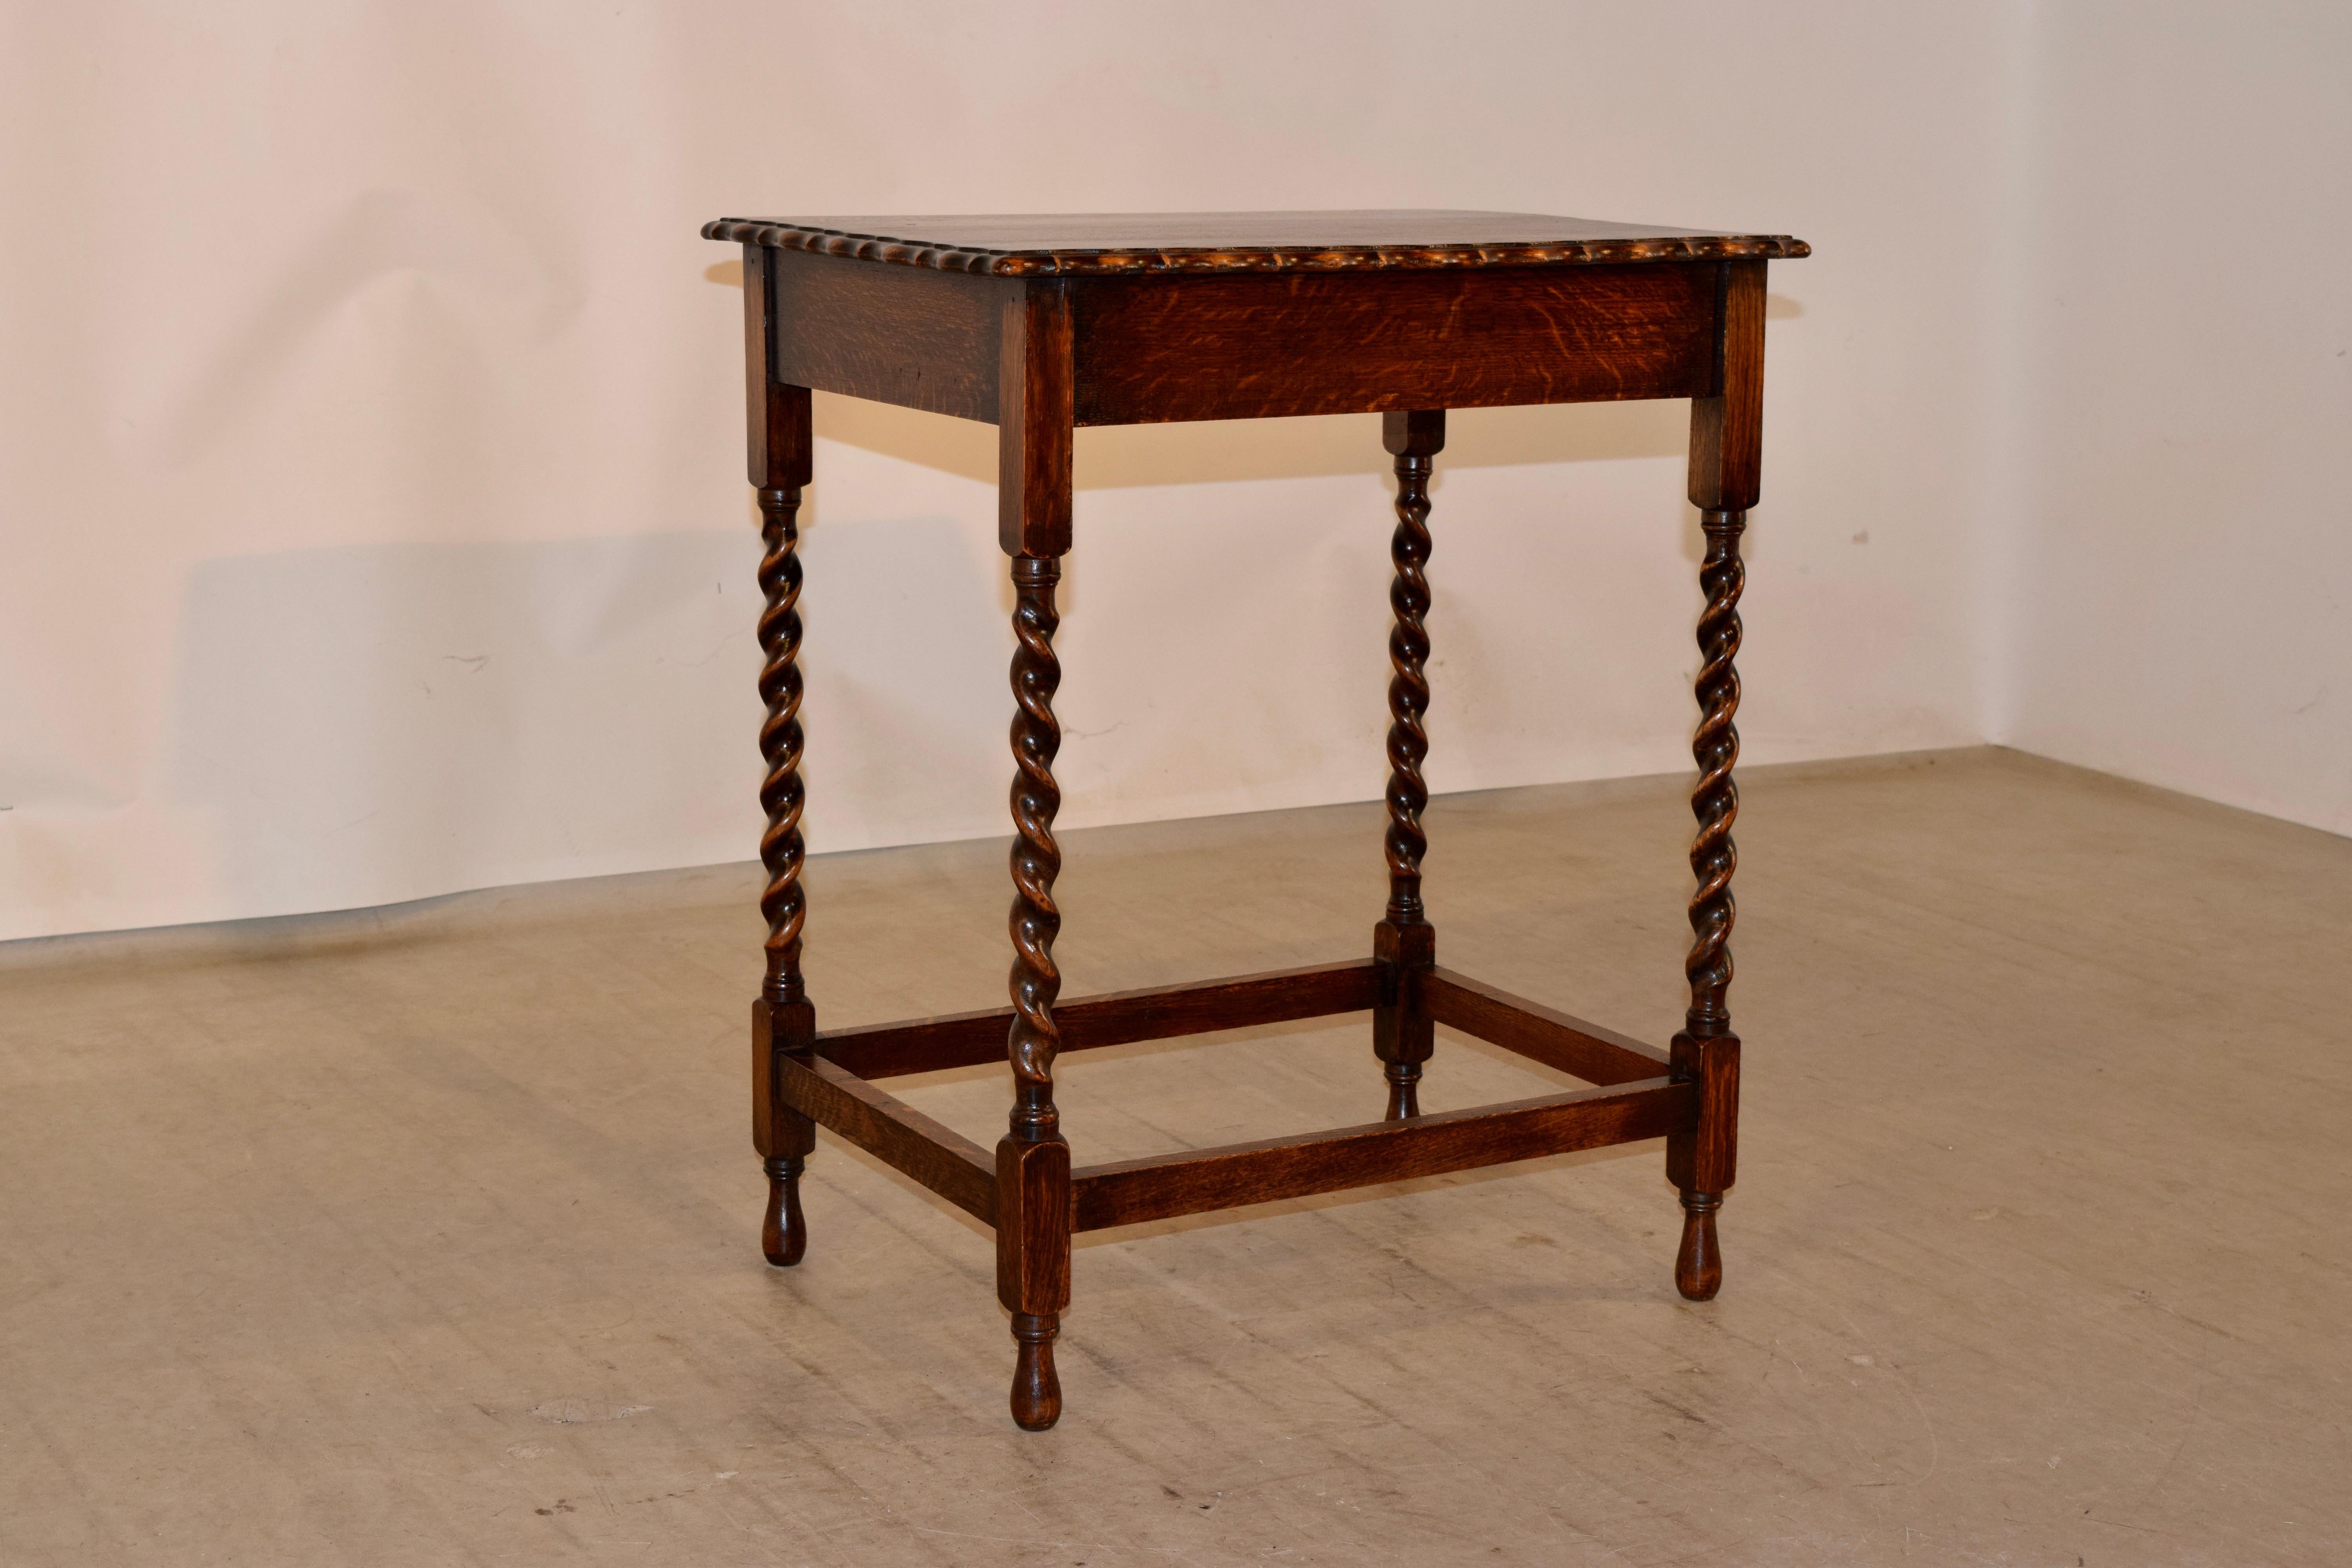 Edwardian oak side table from England with a scalloped and bevelled edge around the top, over a simple apron and supported on hand turned barley twist legs, joined by simple stretchers and raised on hand turned feet.